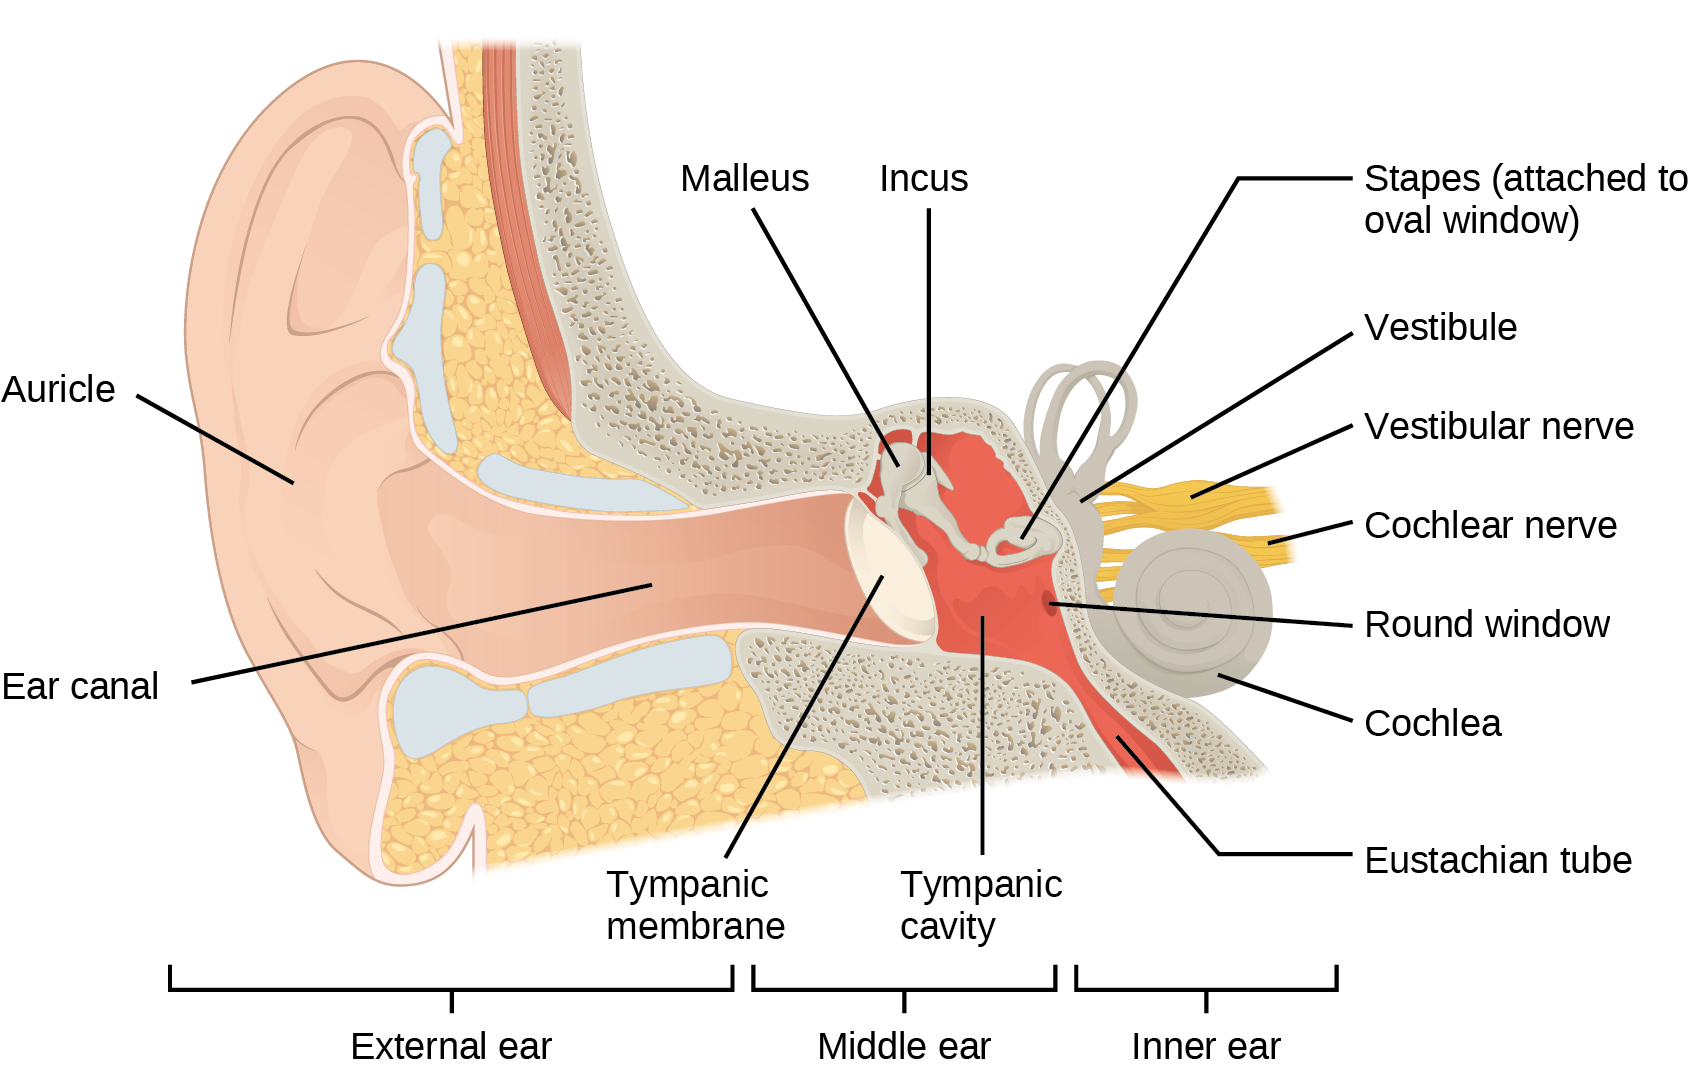 This image shows the structure of the ear with the major parts labeled. The external ear contains the auricle, ear canal, and tympanic membrane. The middle ear contains the ossicles and is connected to the pharynx by the Eustachian tube. The inner ear contains the cochlea and vestibule, which are responsible for audition and equilibrium, respectively.